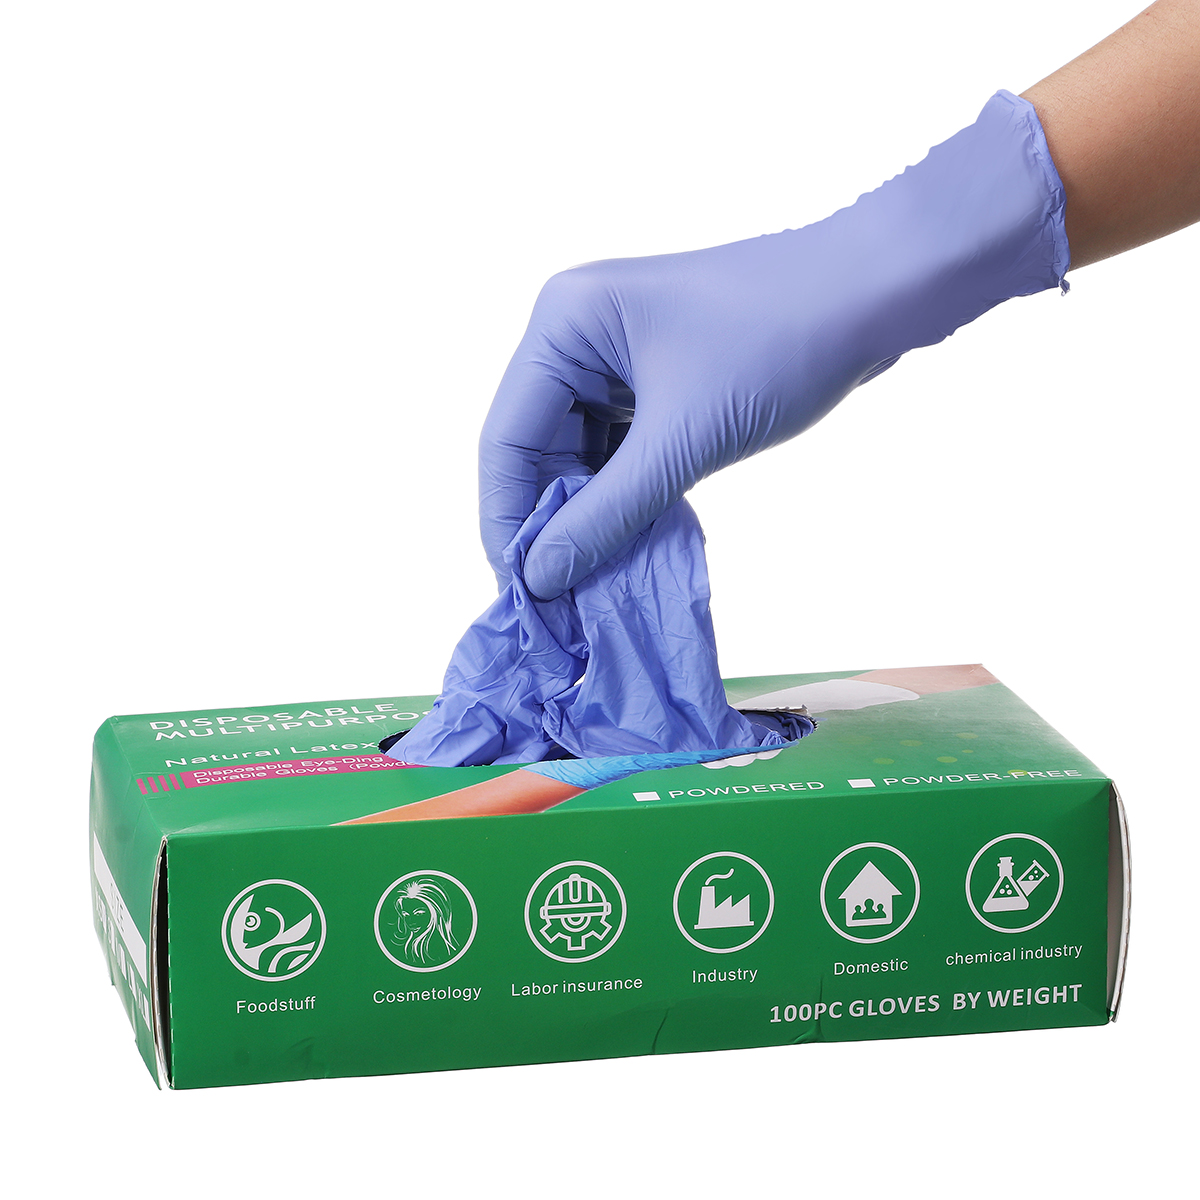 Slimerence-100Pcs-Disposable-Nitrile-BBQ-Gloves-Waterproof-Glove-1655114-5